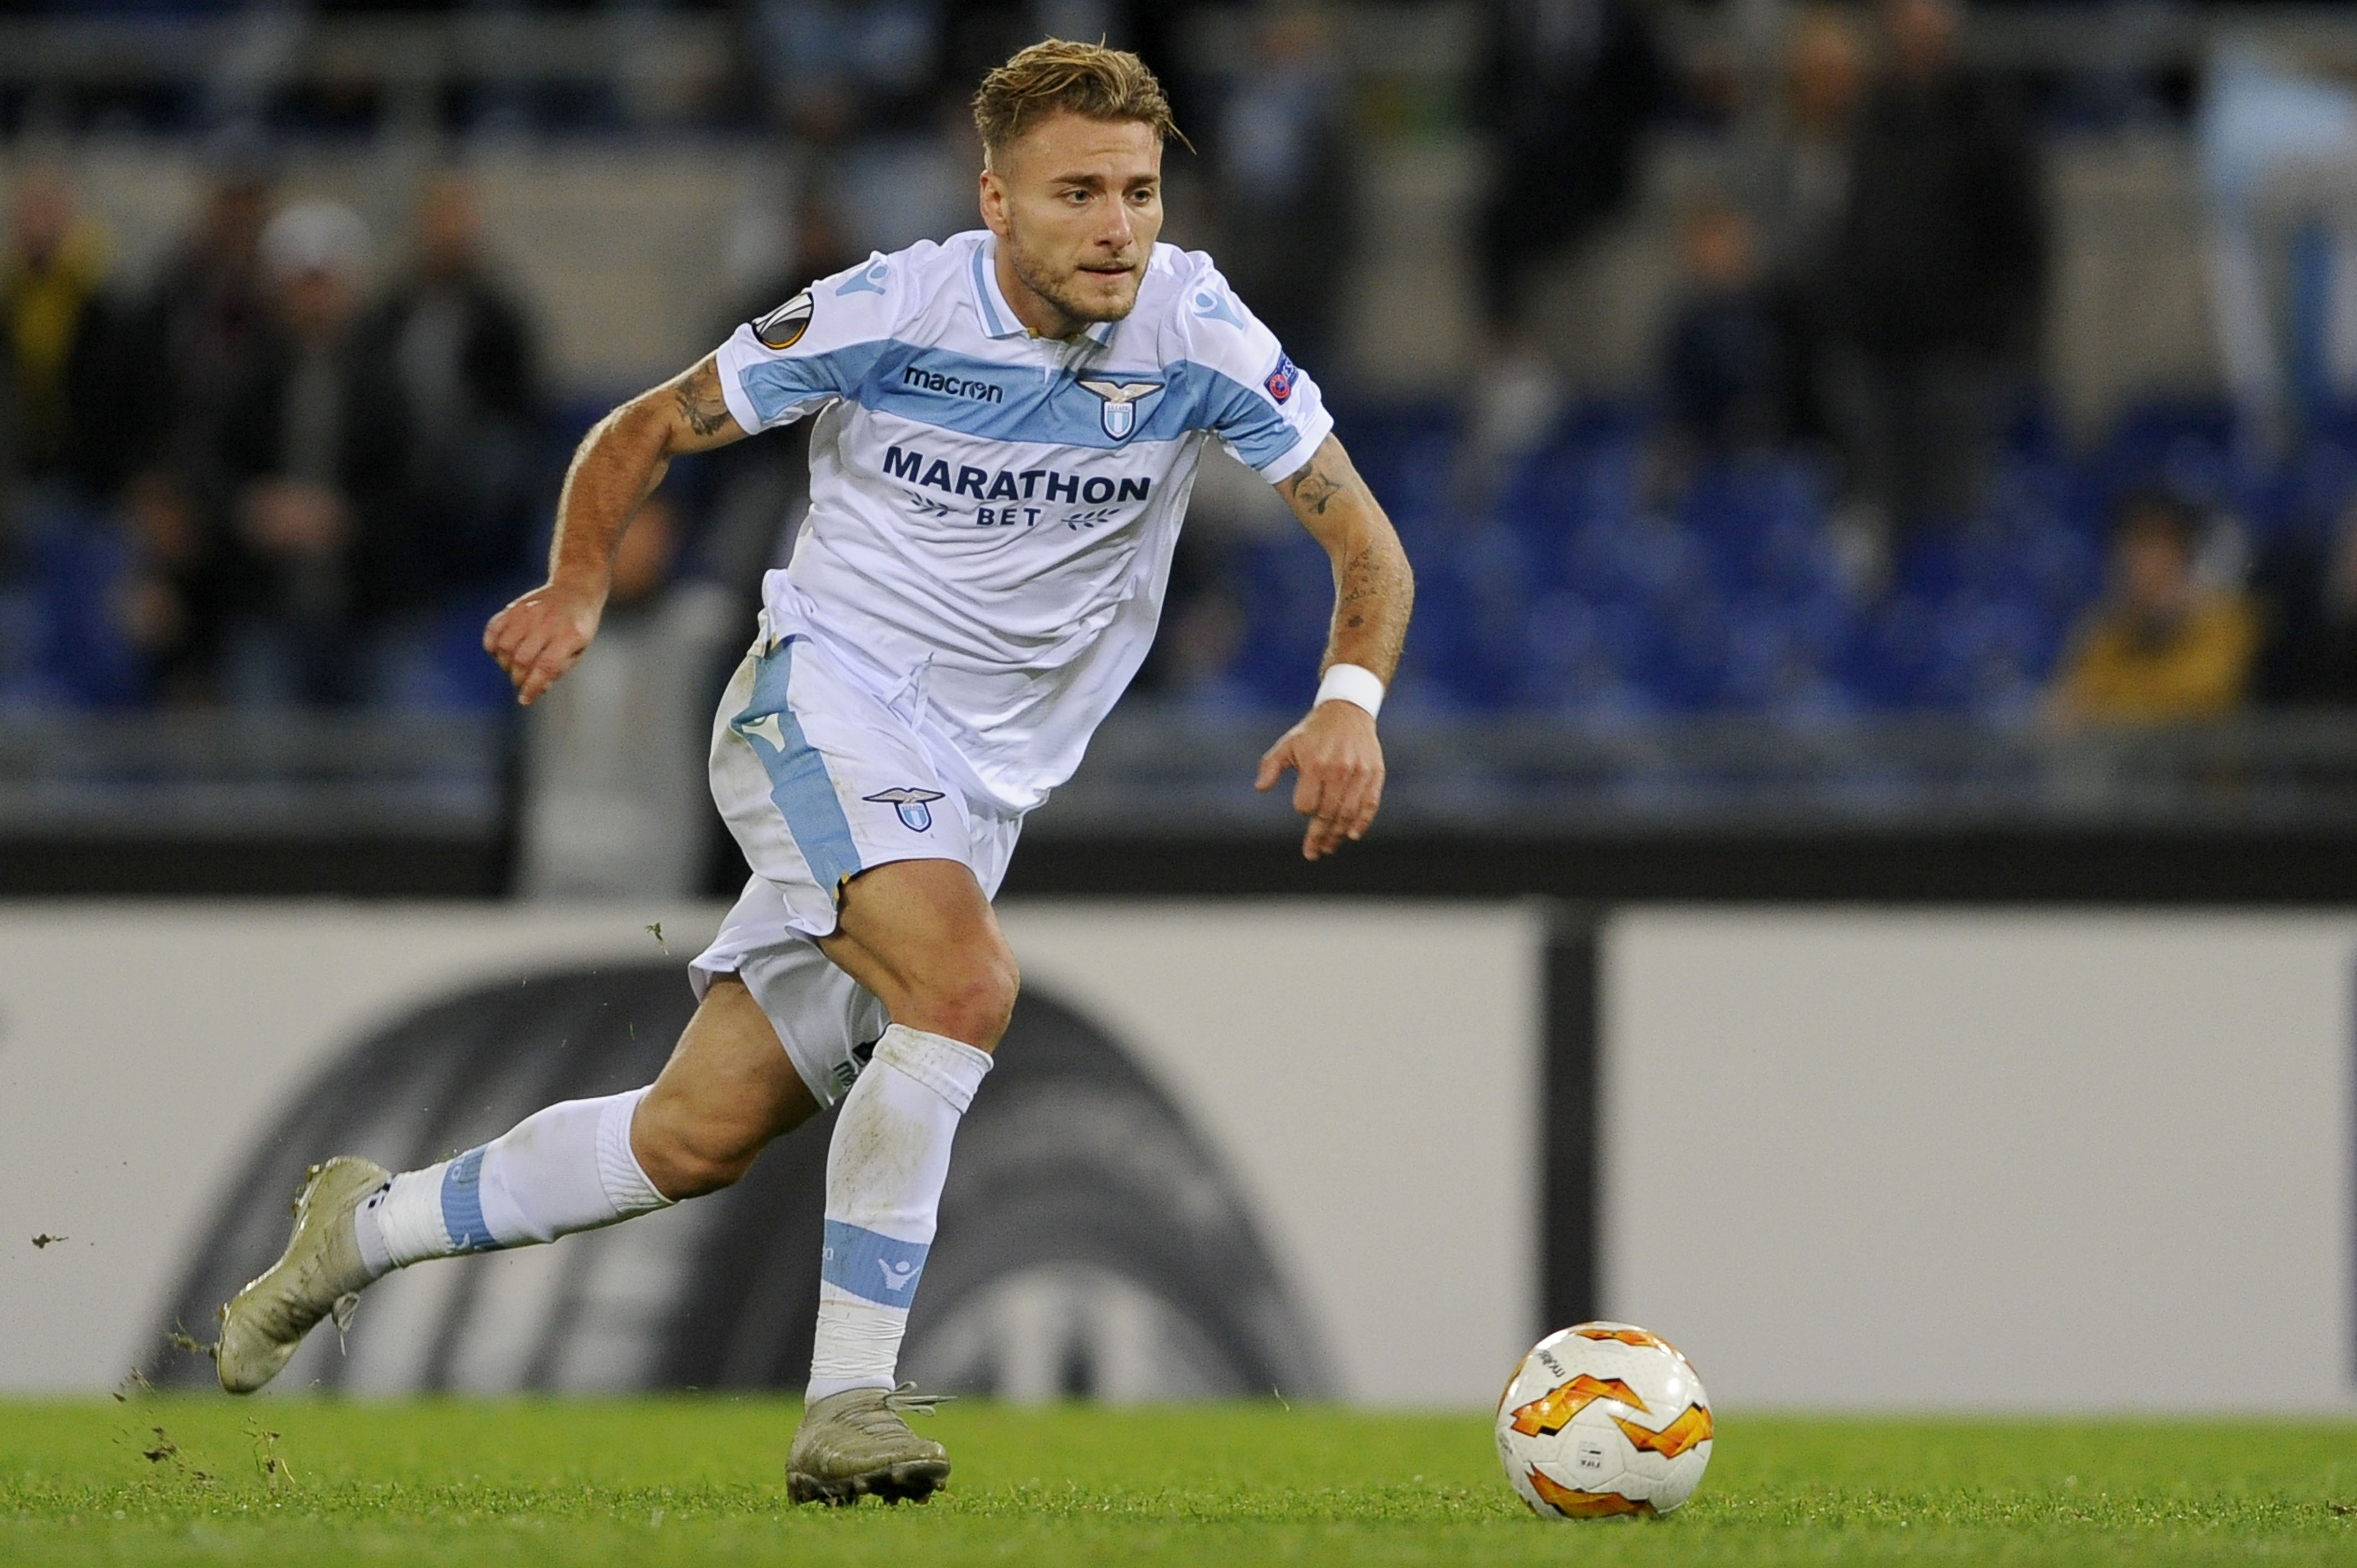 Ciro Immobile will play a key role this weekend. (Photo by Marco Rosi/Getty Images)